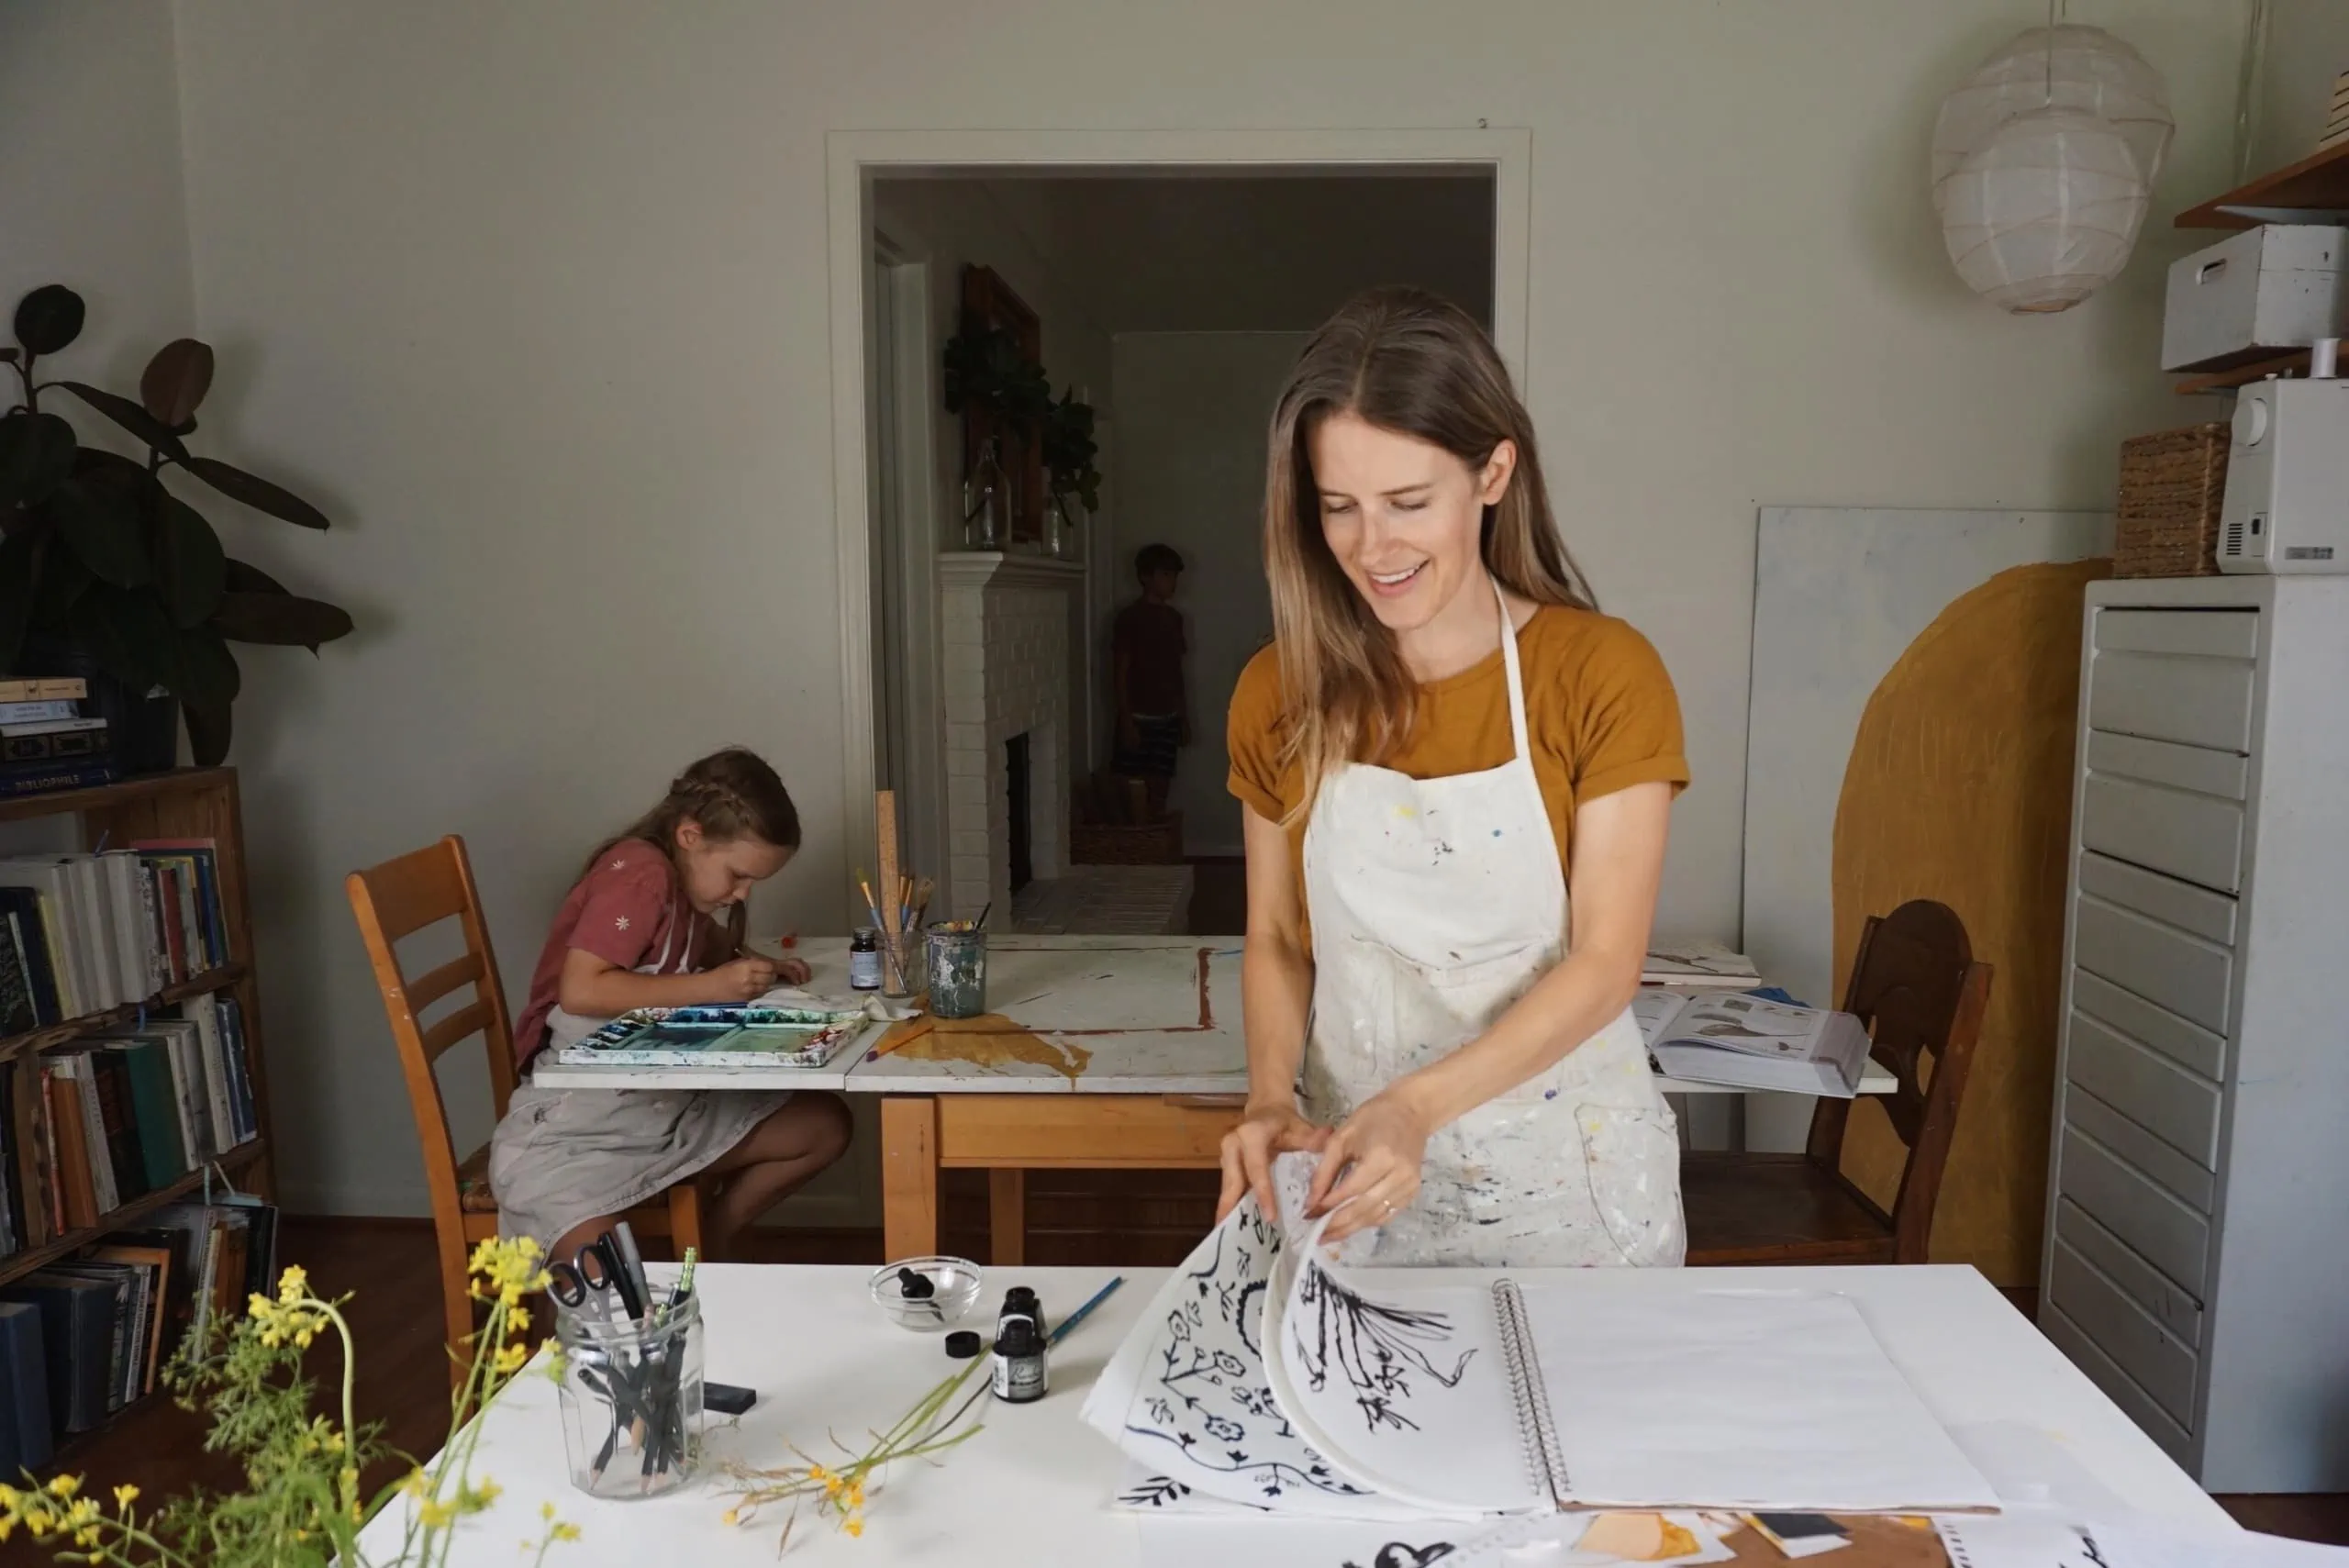 Rachel Smith works on a project. In the background, her daughter draws at a table.